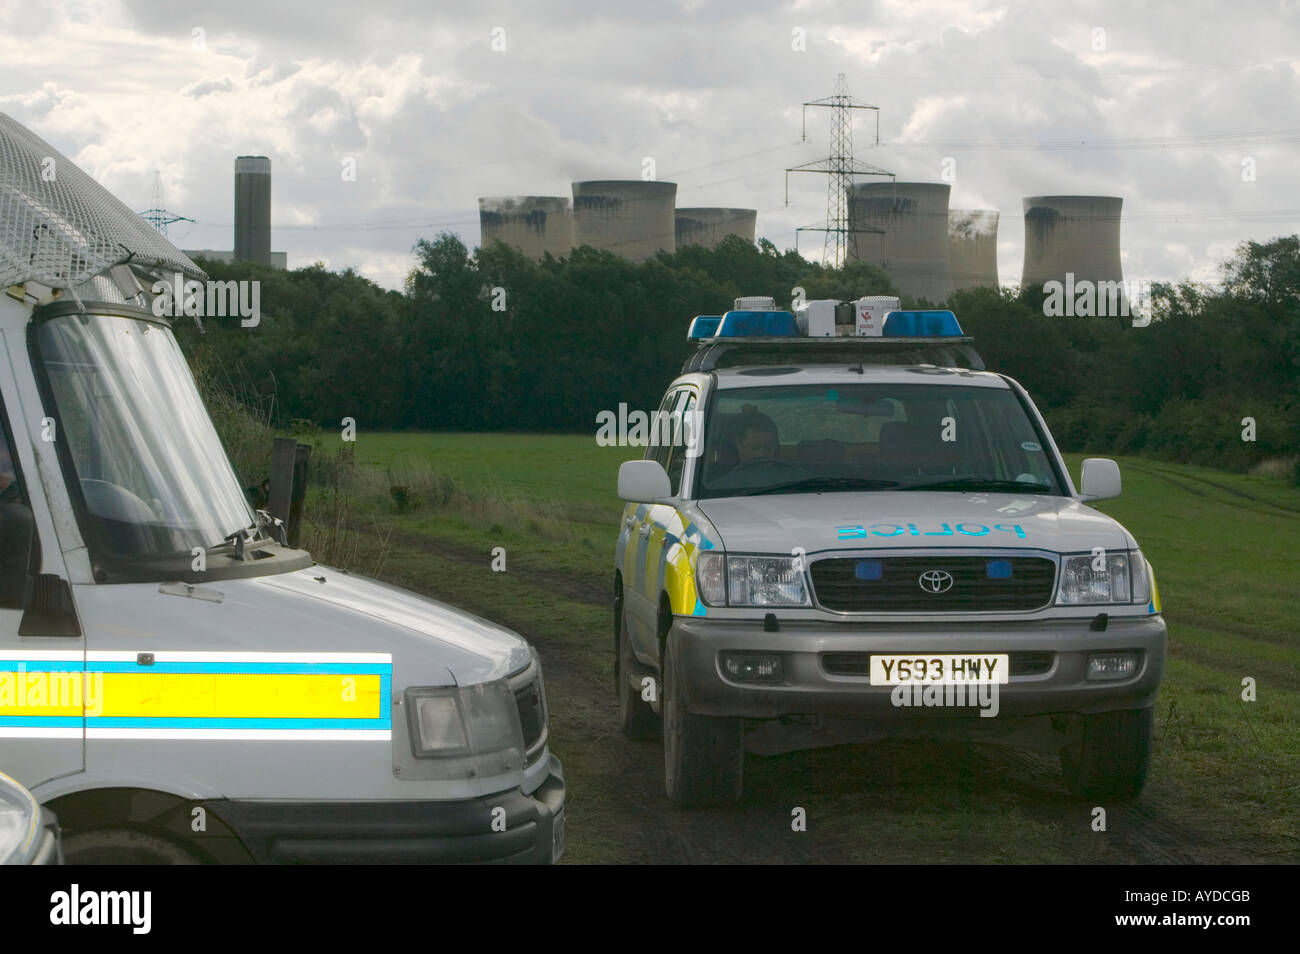 Policing Drax Power station, selby, Yorkshire, UK. Western Europes single largest emmitter of greenhouse gases Stock Photo